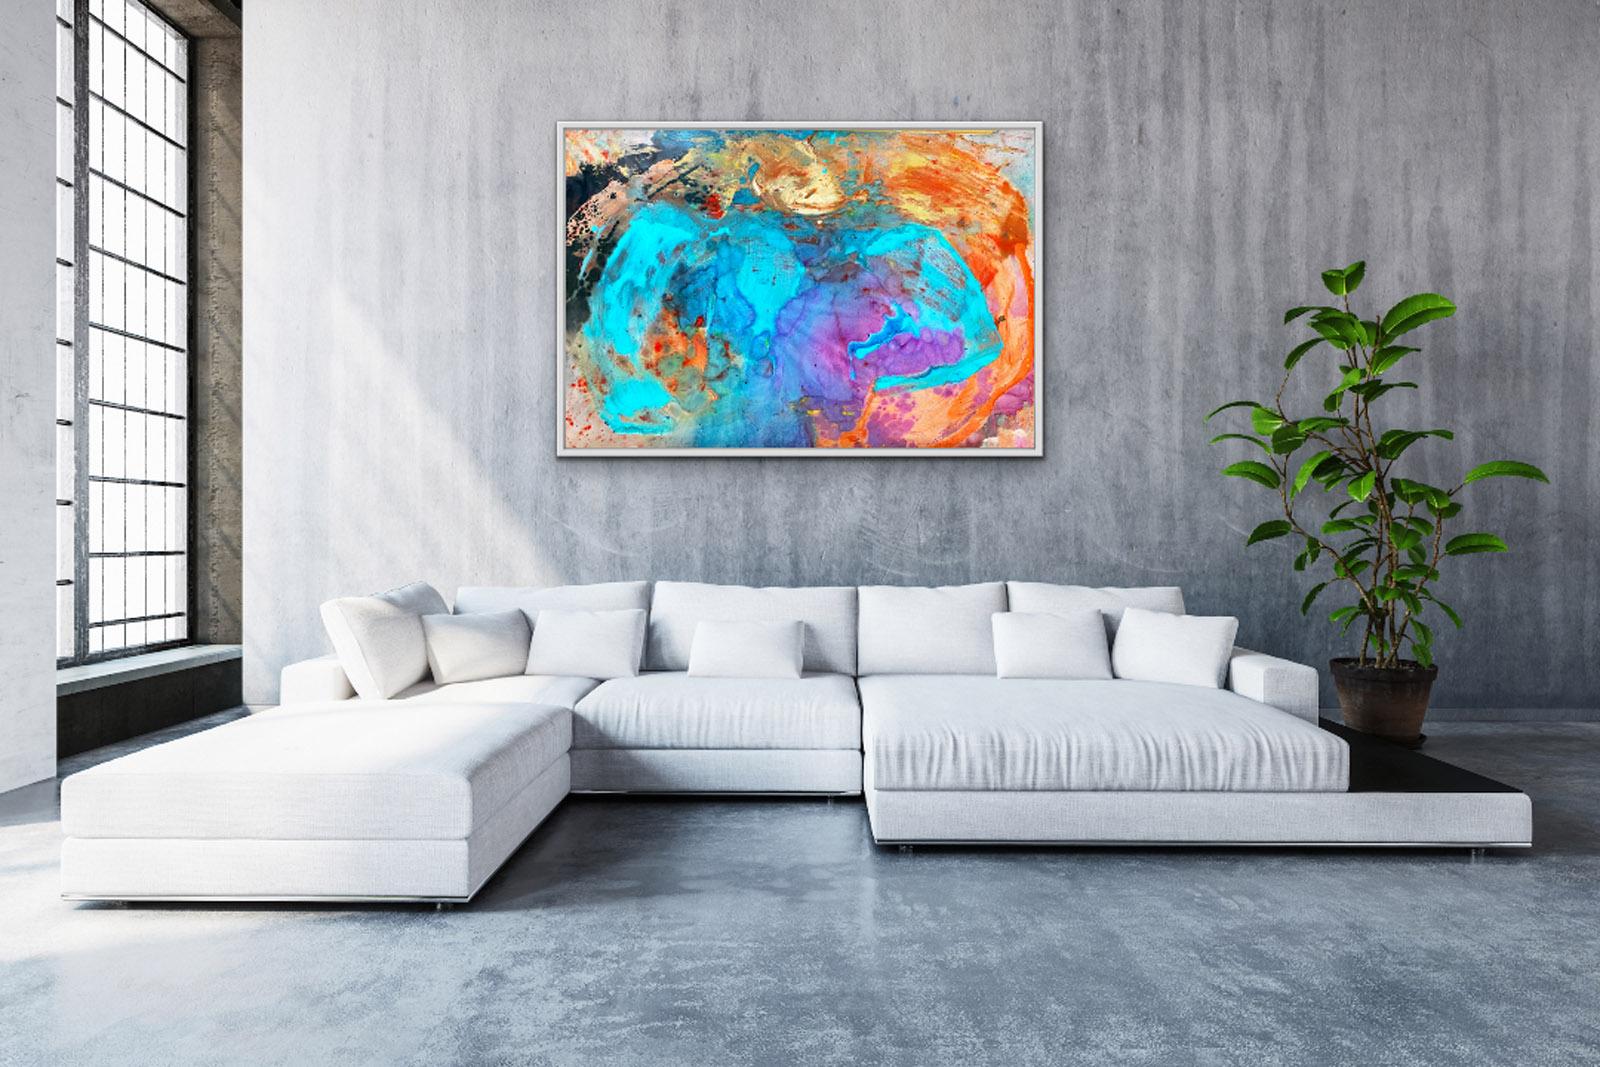 Reef - Abstract Expressionist Painting by Francine Tint